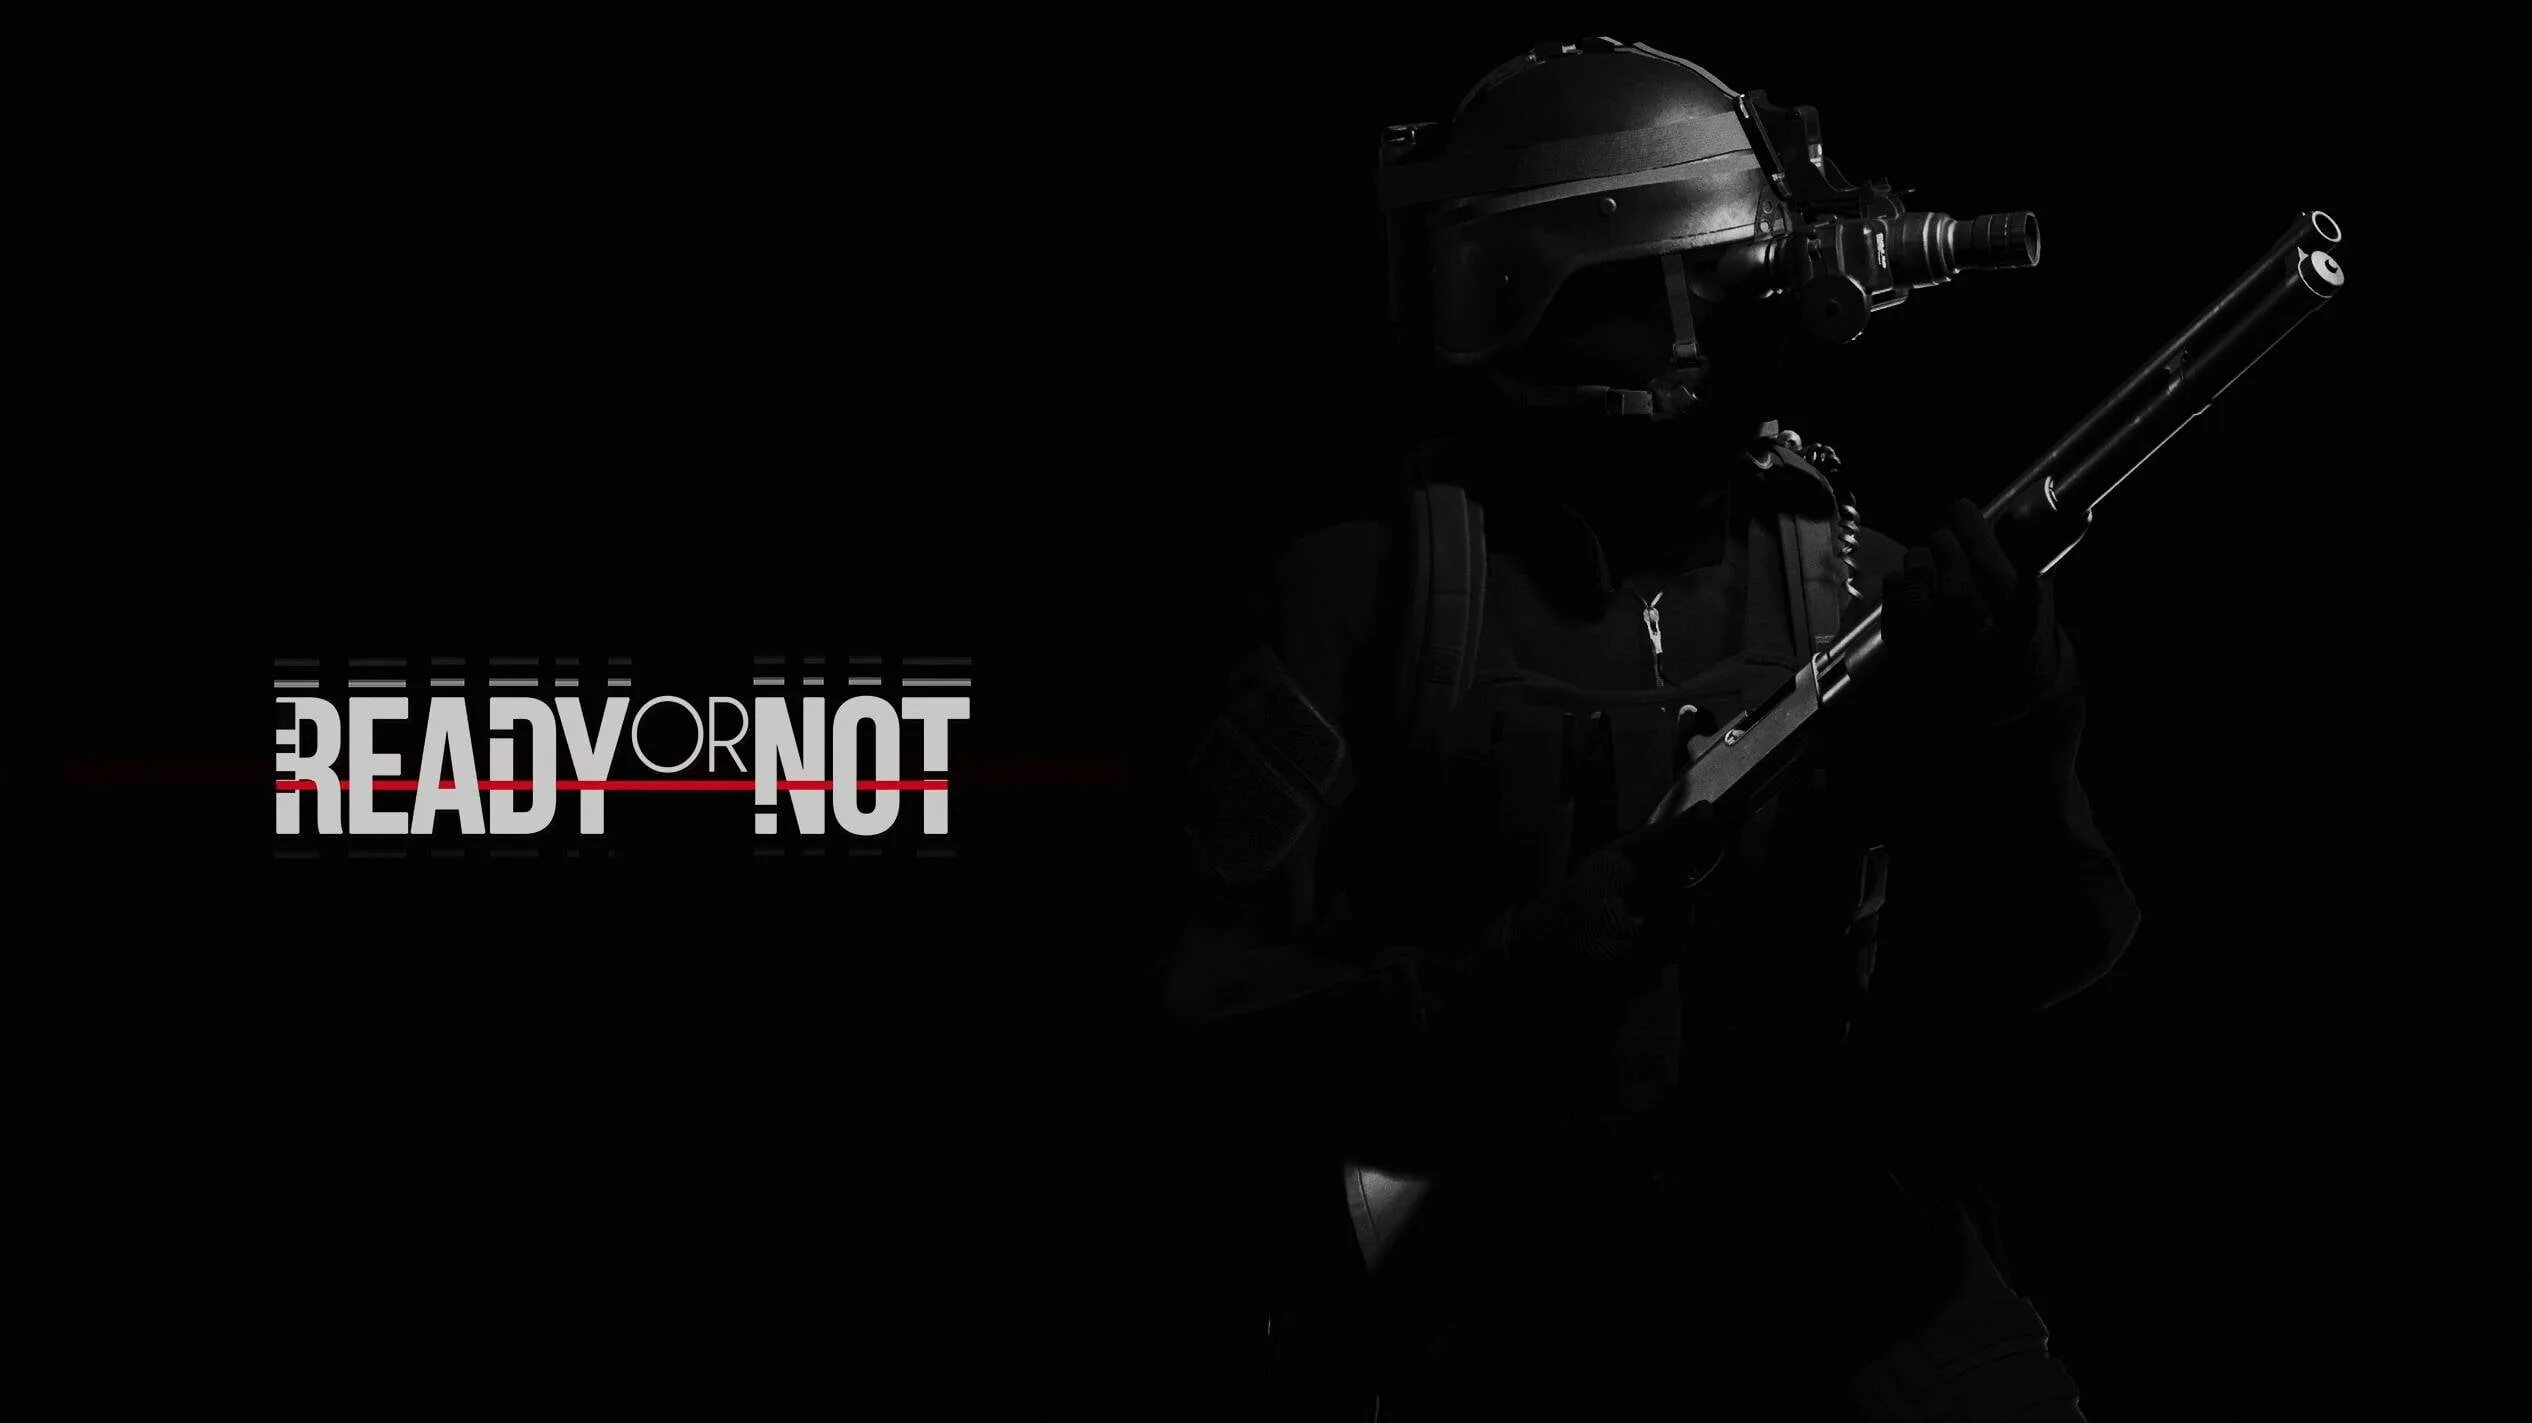 Ready or not фон. Ready or not игра. Ready or not обои. SWAT обои.